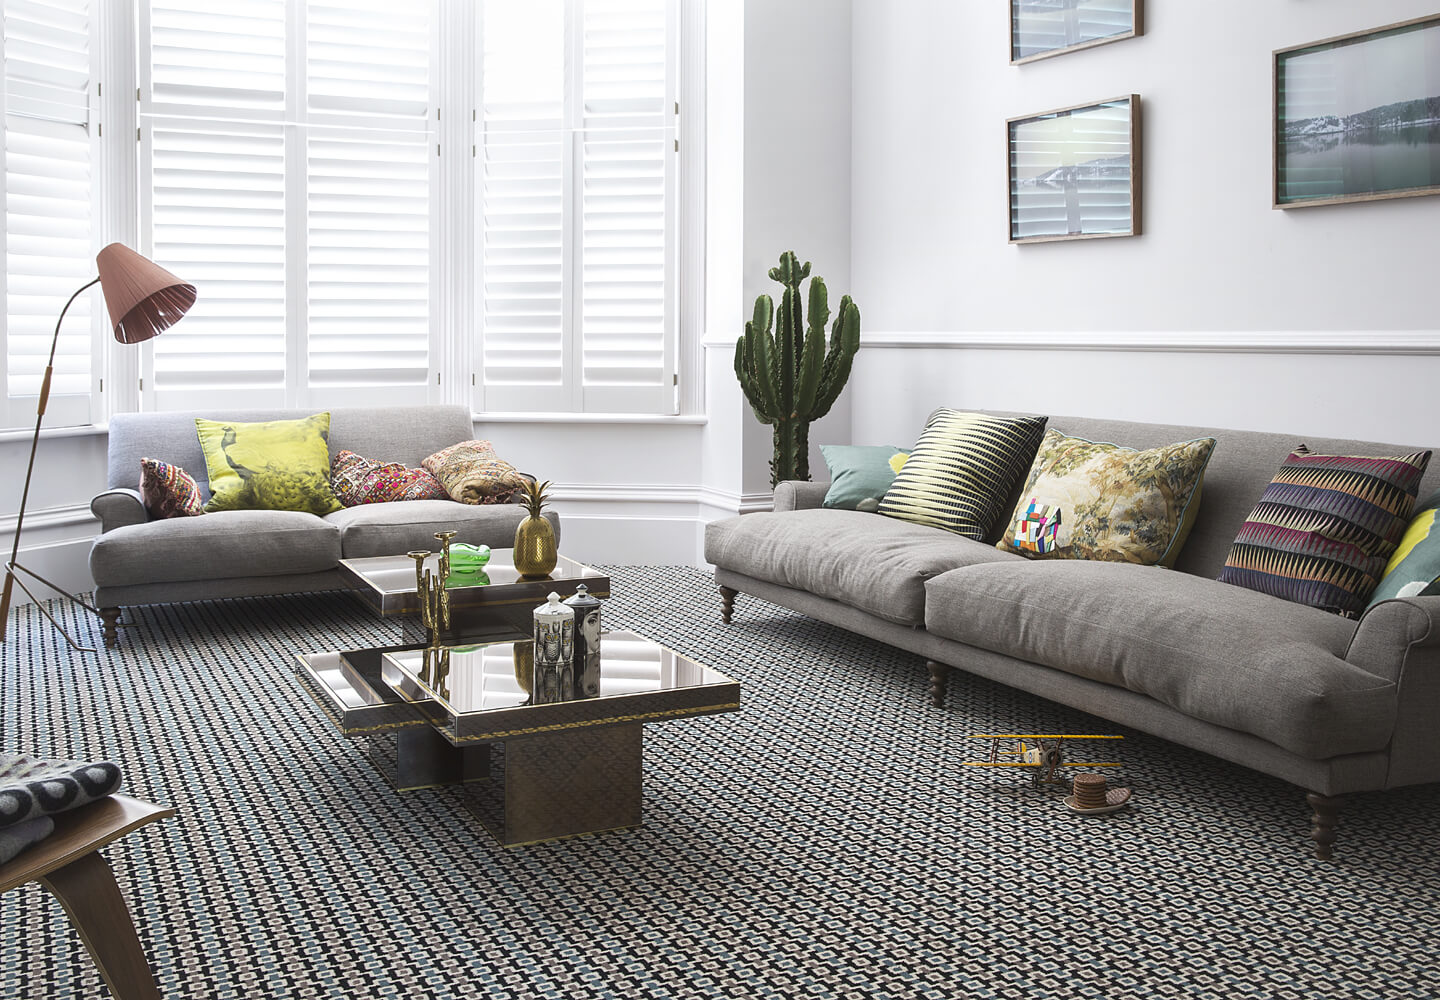 Quirky Shuttle Silas British Patterned Carpet designed by Margo Selby